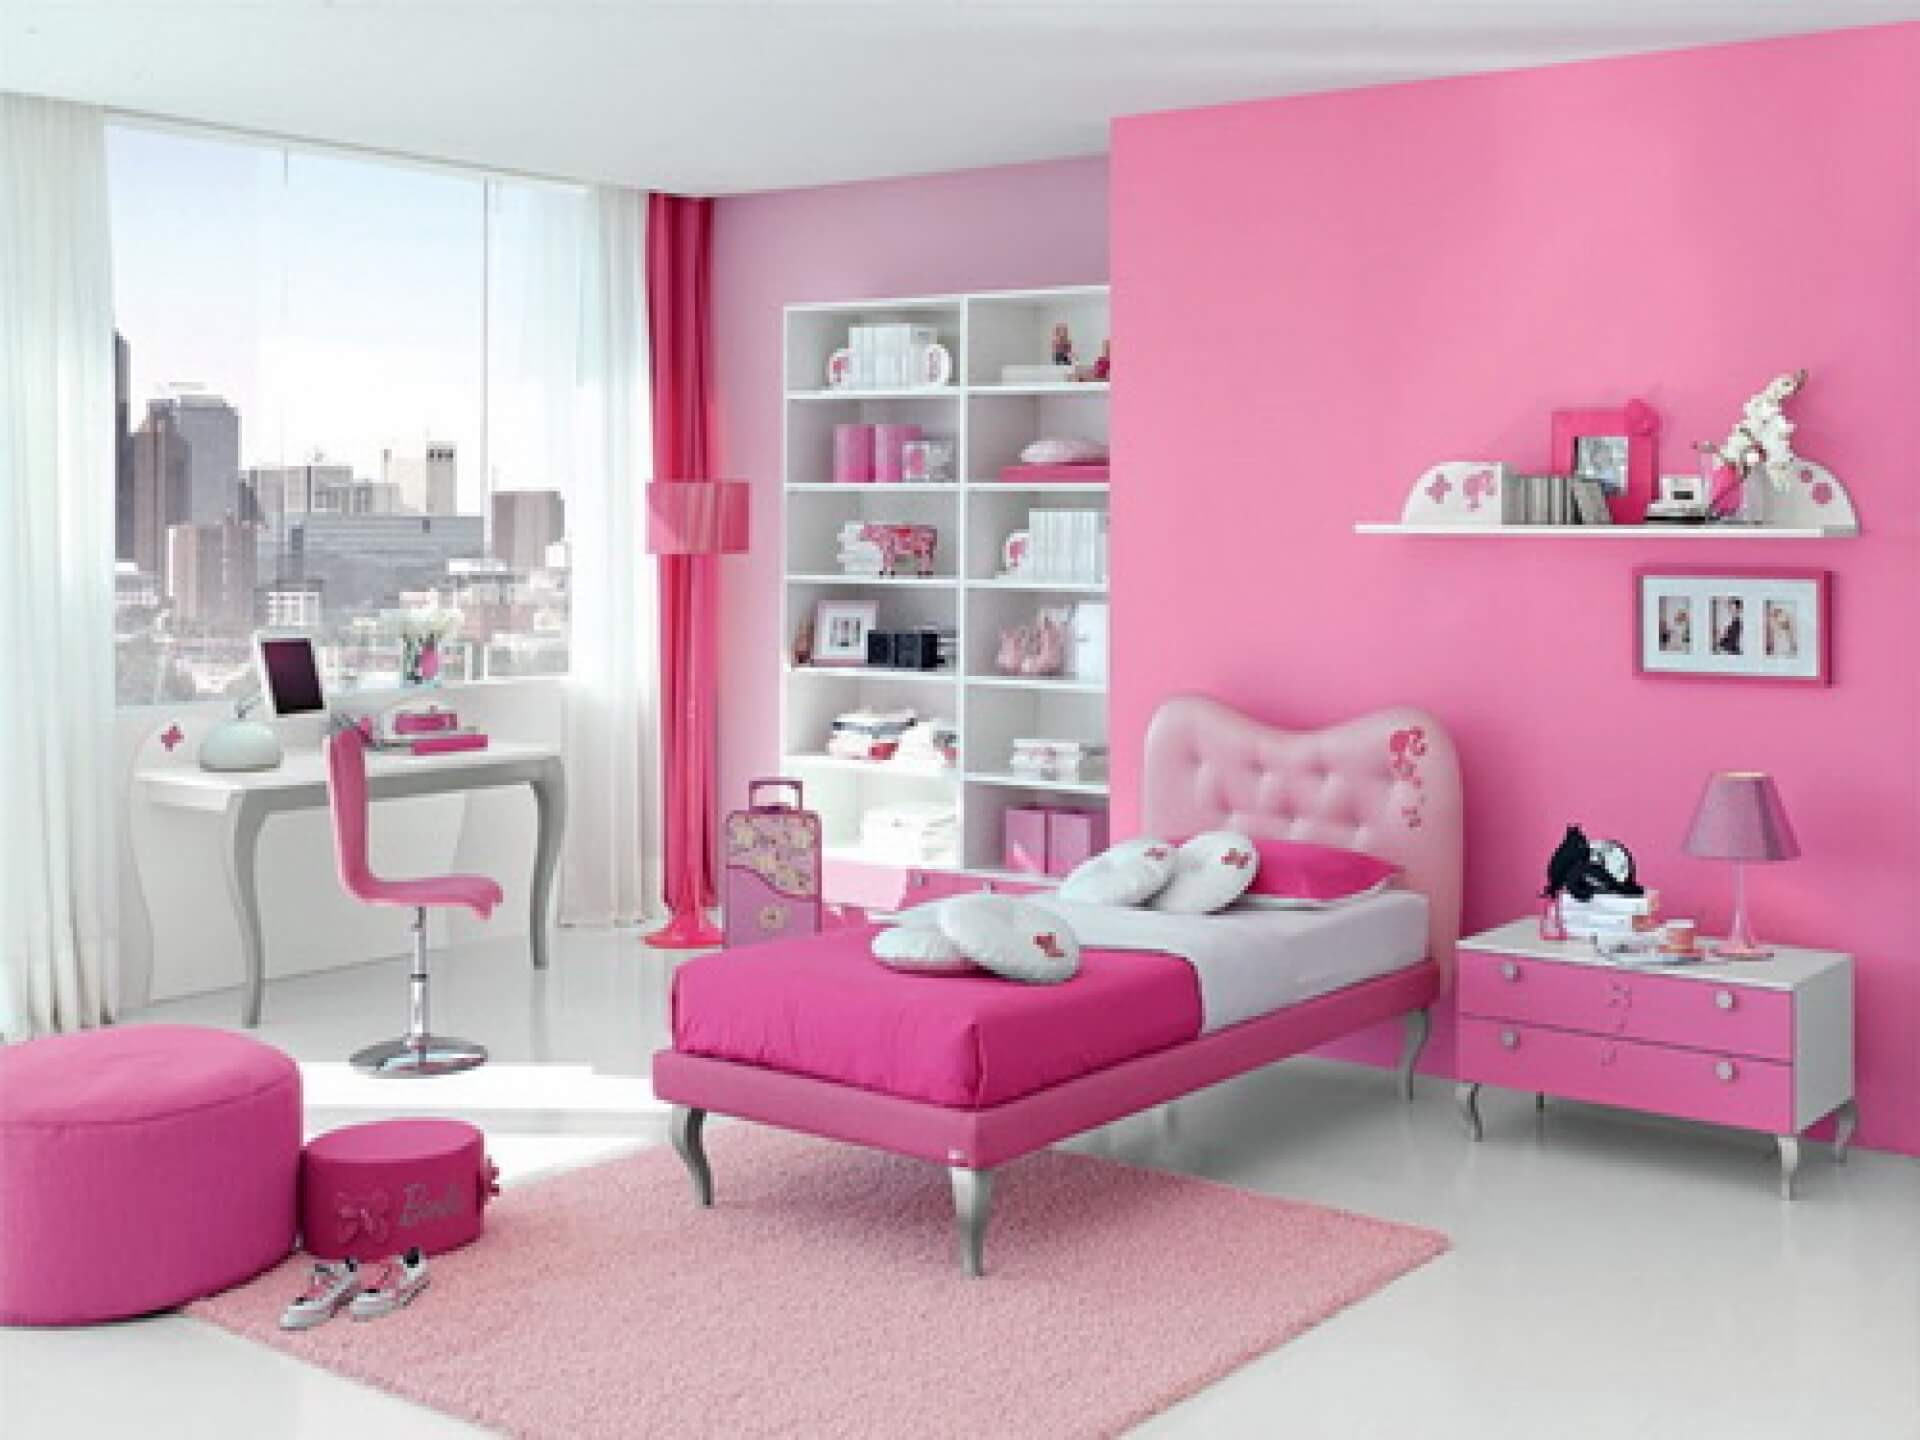 Paint Ideas For Girl Bedroom
 Top 10 Girls Bedroom Paint Ideas 2017 TheyDesign